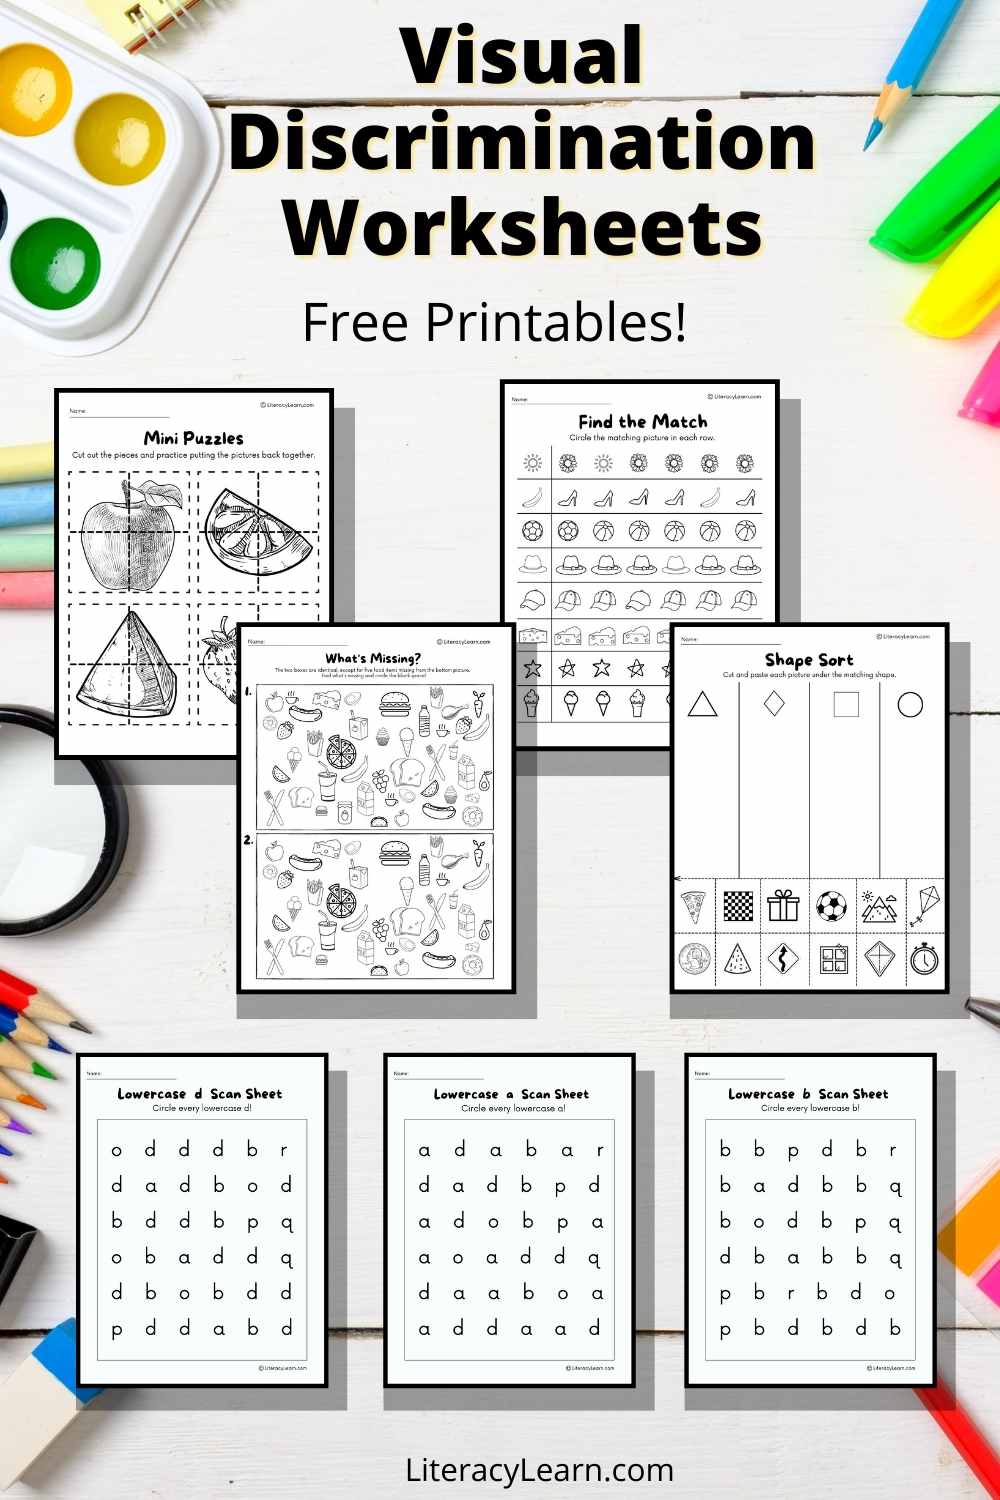 visual discrimination worksheets free printables literacy learn